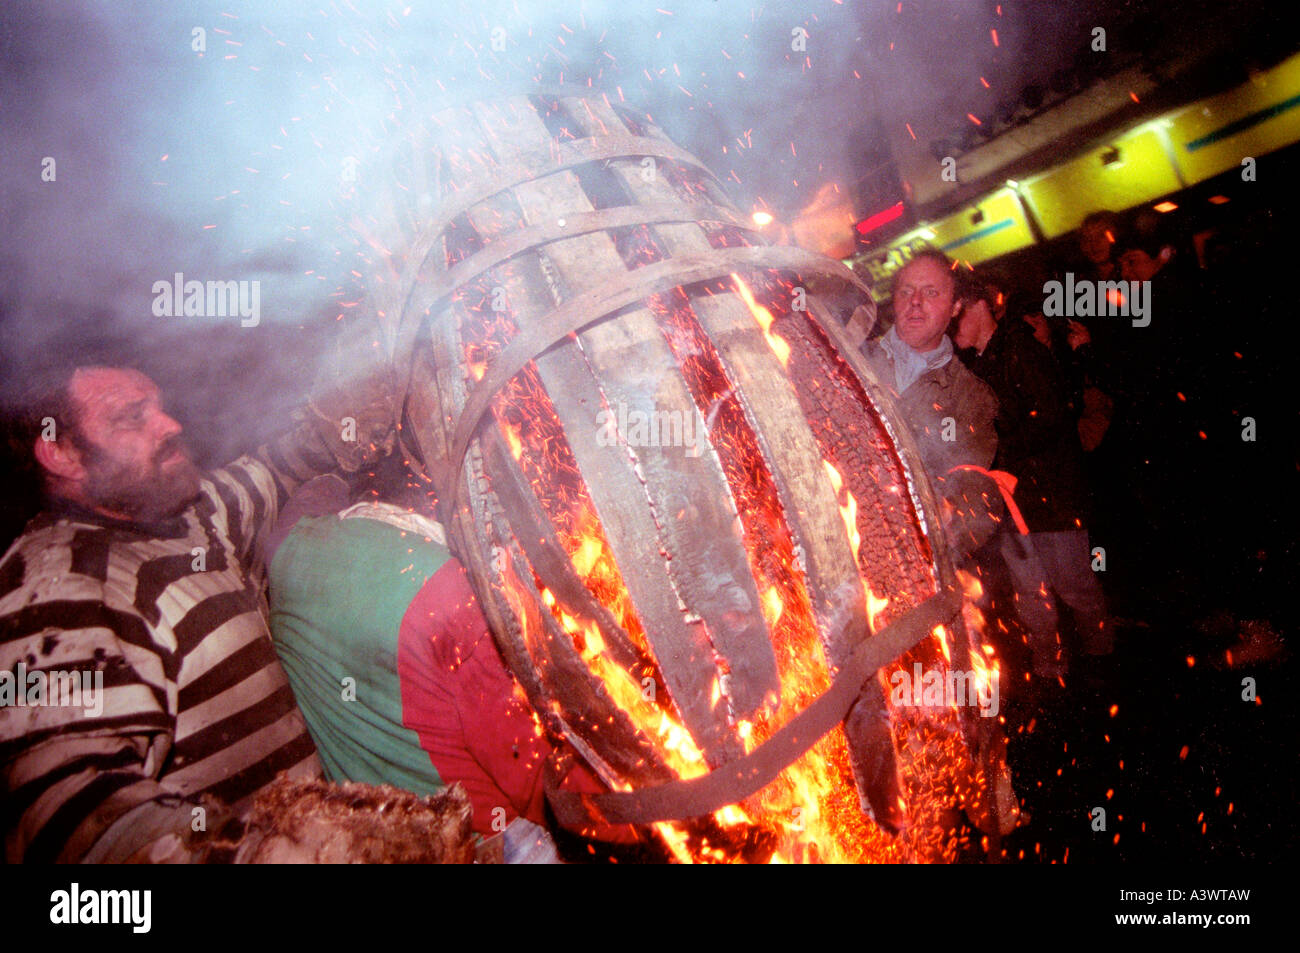 The Tar Barrels of Ottery St Mary in Devon UK Stock Photo